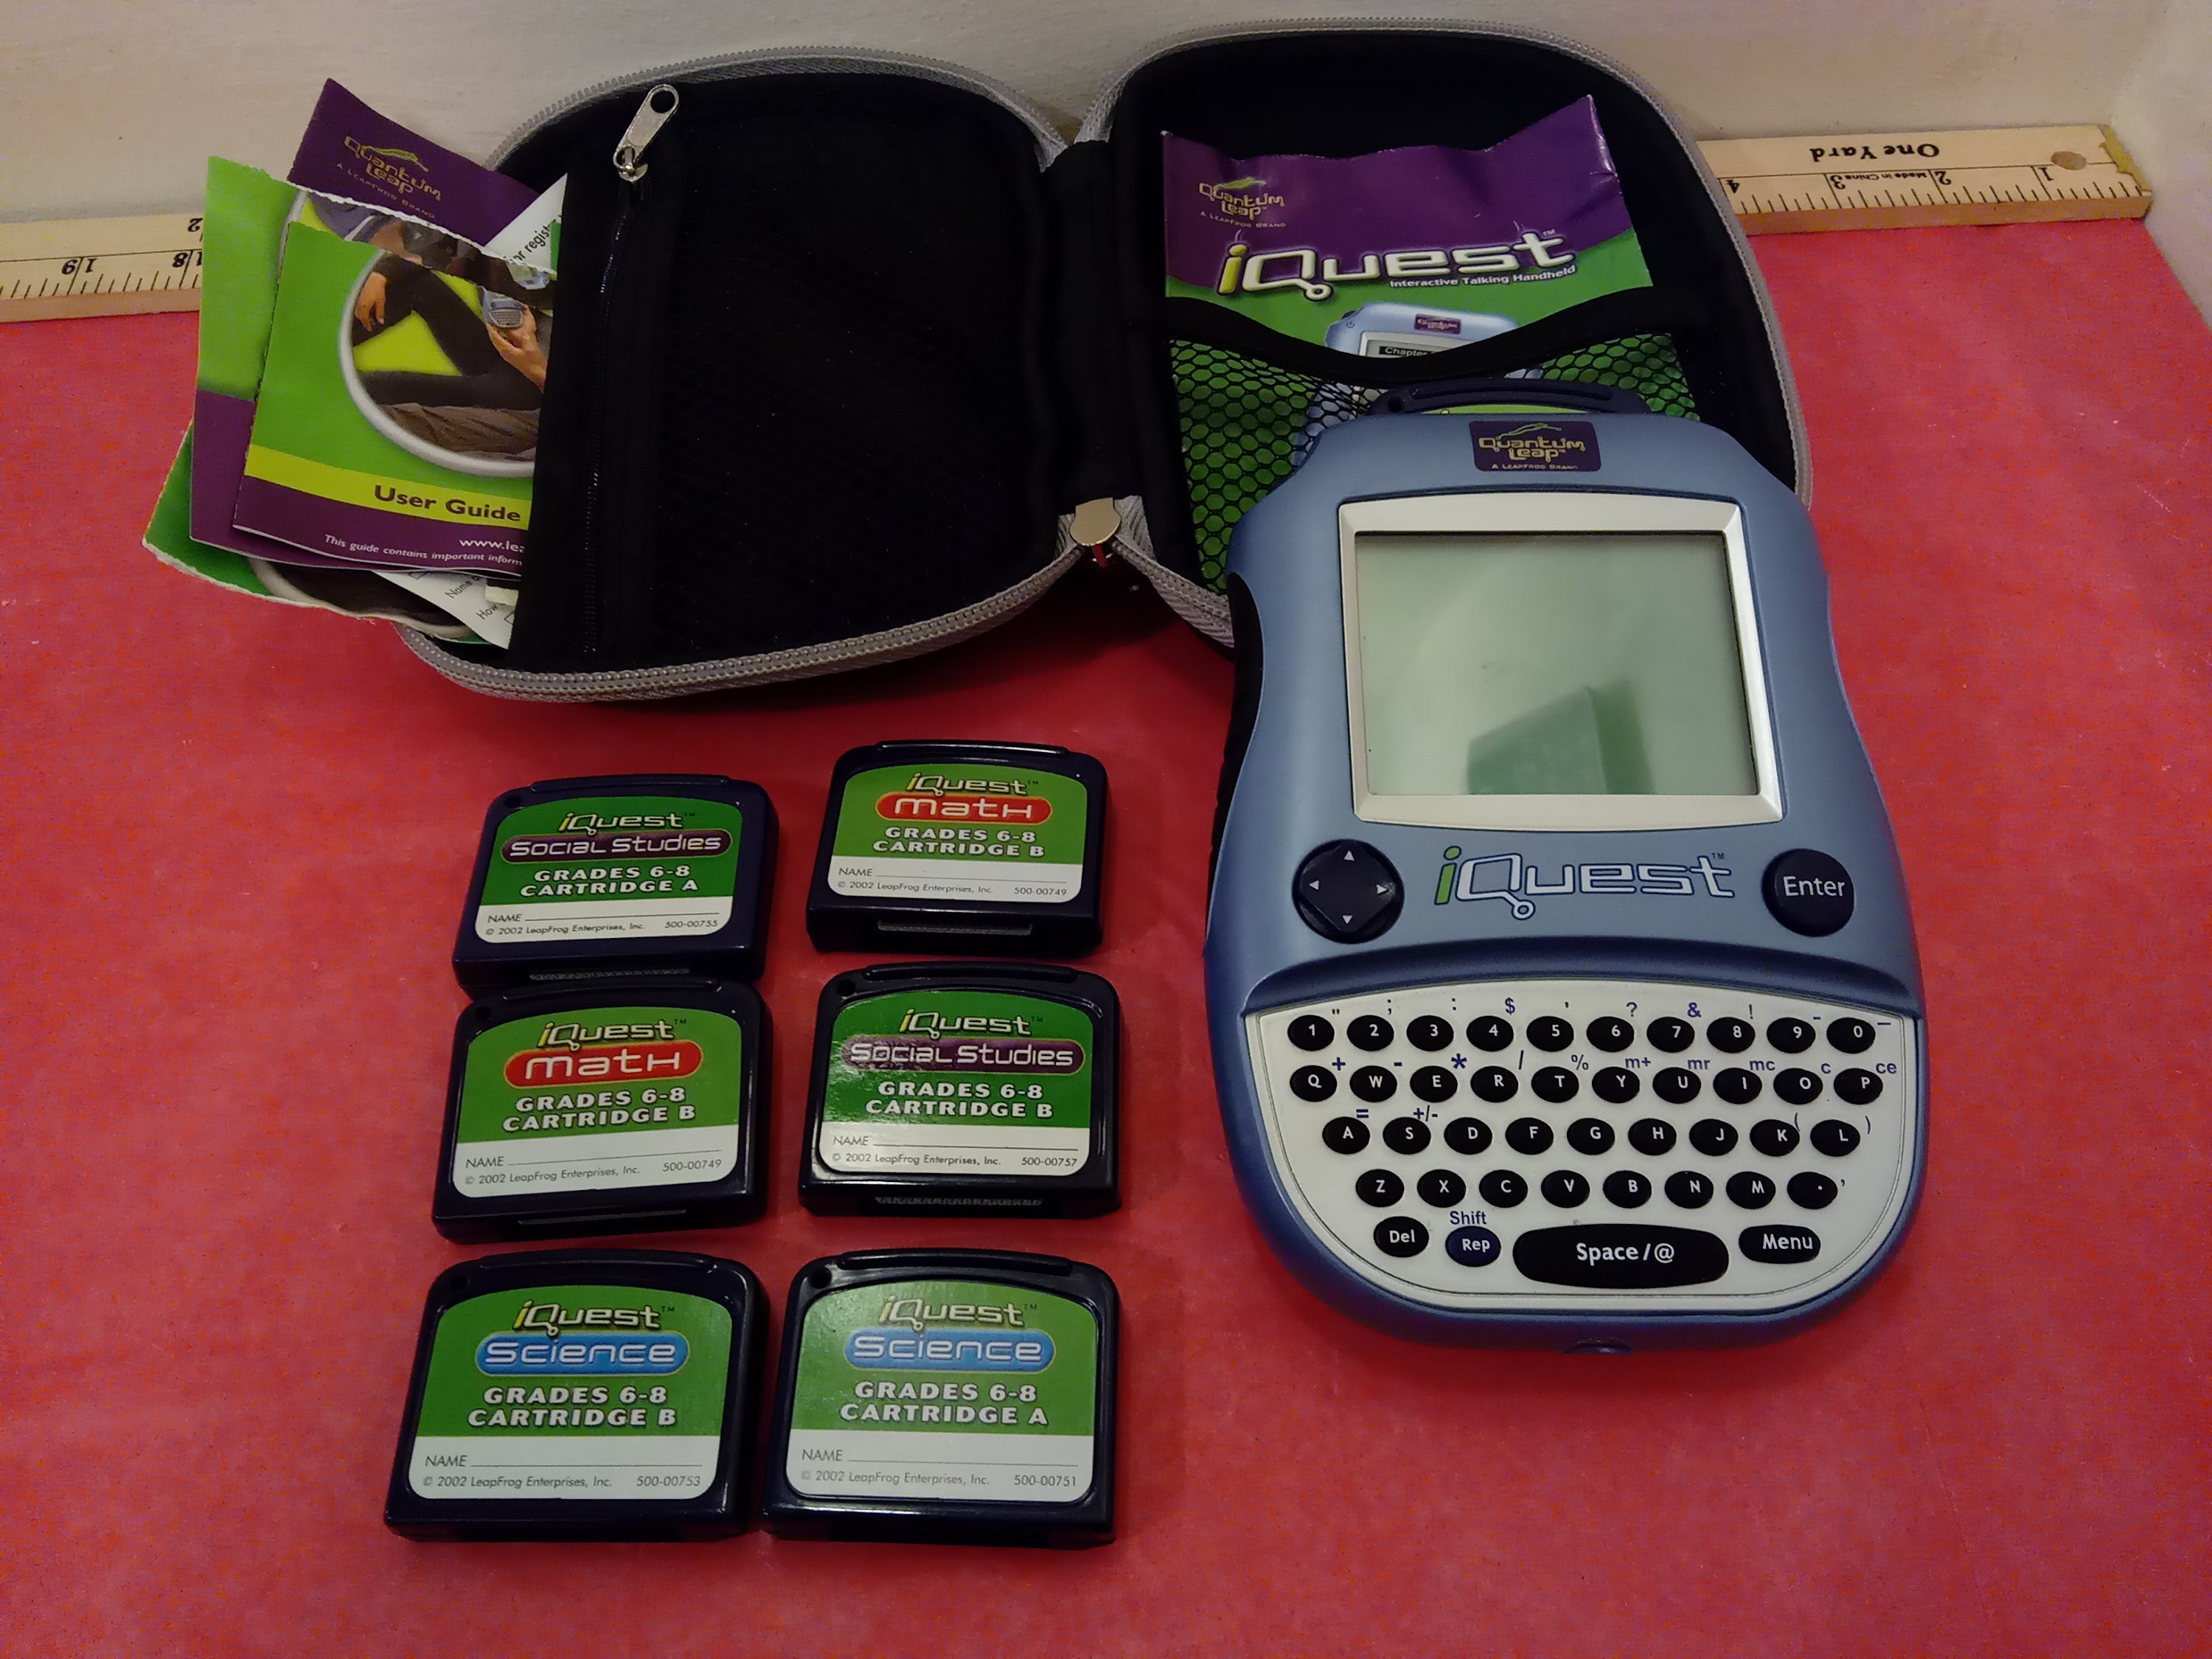 IQuest by Leapfrog, Learning System for Kids, 7 Cartridges, 2002~